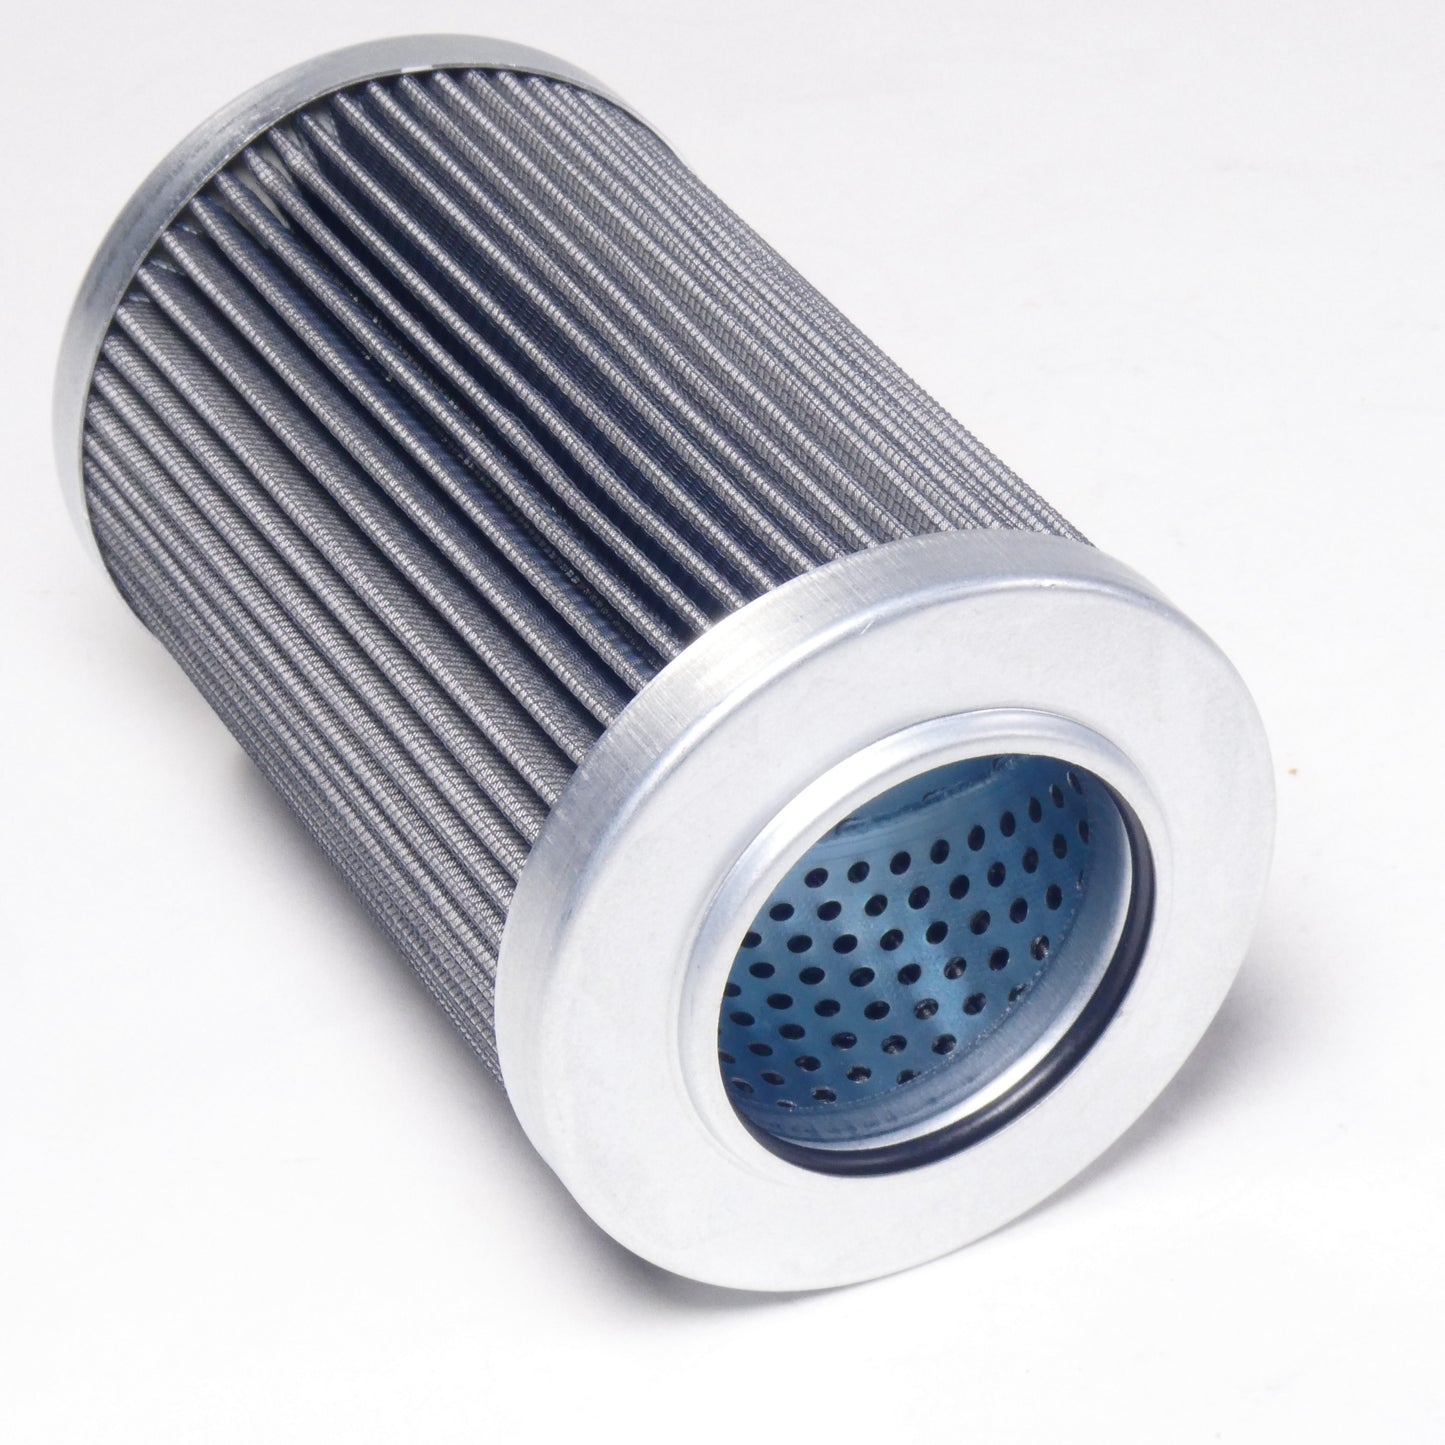 Hydrafil Replacement Filter Element for EPE 1.0020G80-A00-0-P